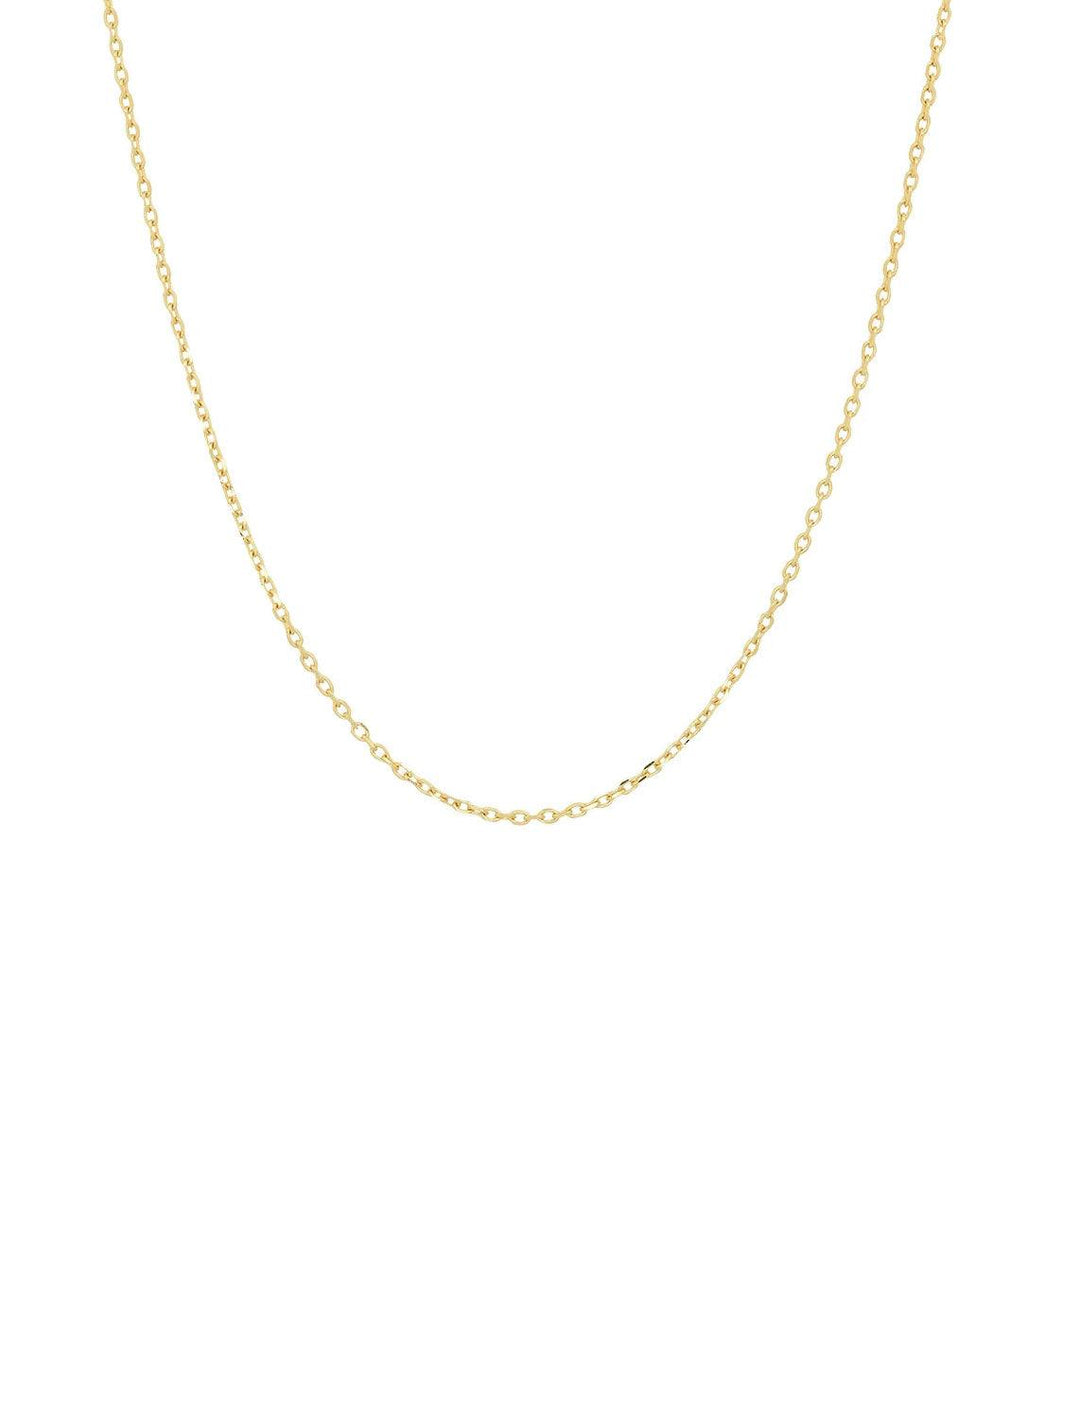 simply linked chain necklace | 18"